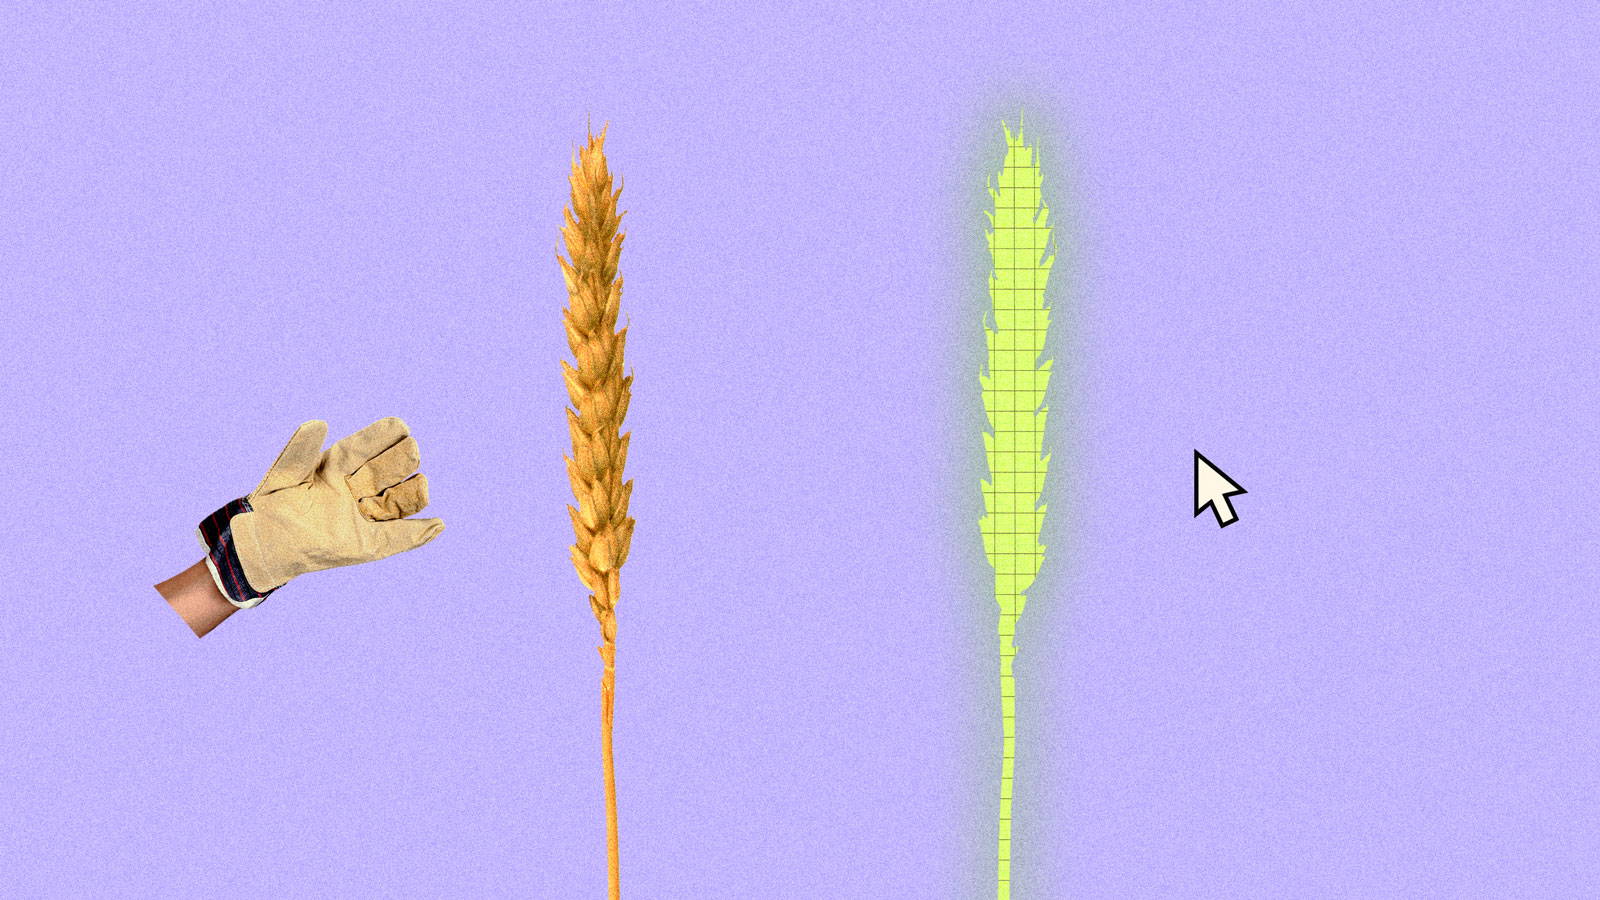 Real wheat stalk alongside its computer generated counterpart